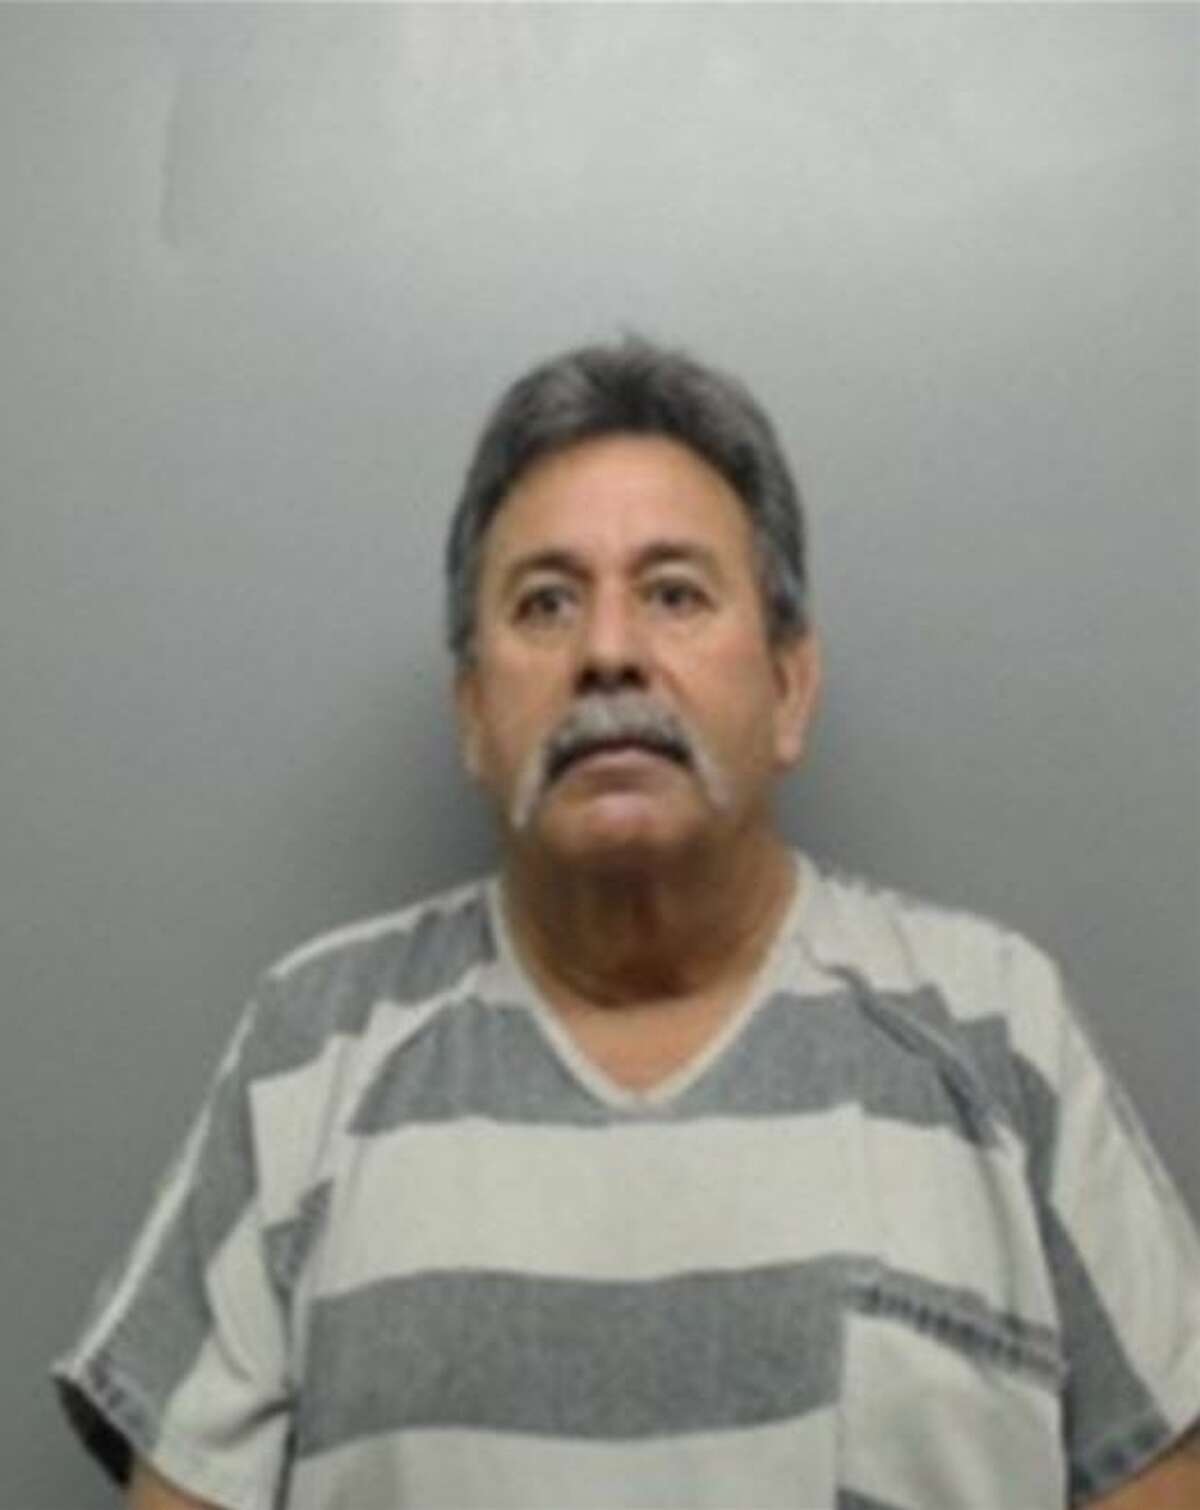 Arnoldo Rene Villarreal, 61, was served with warrants charging him with two counts of indecency with a child by sexual contact. 